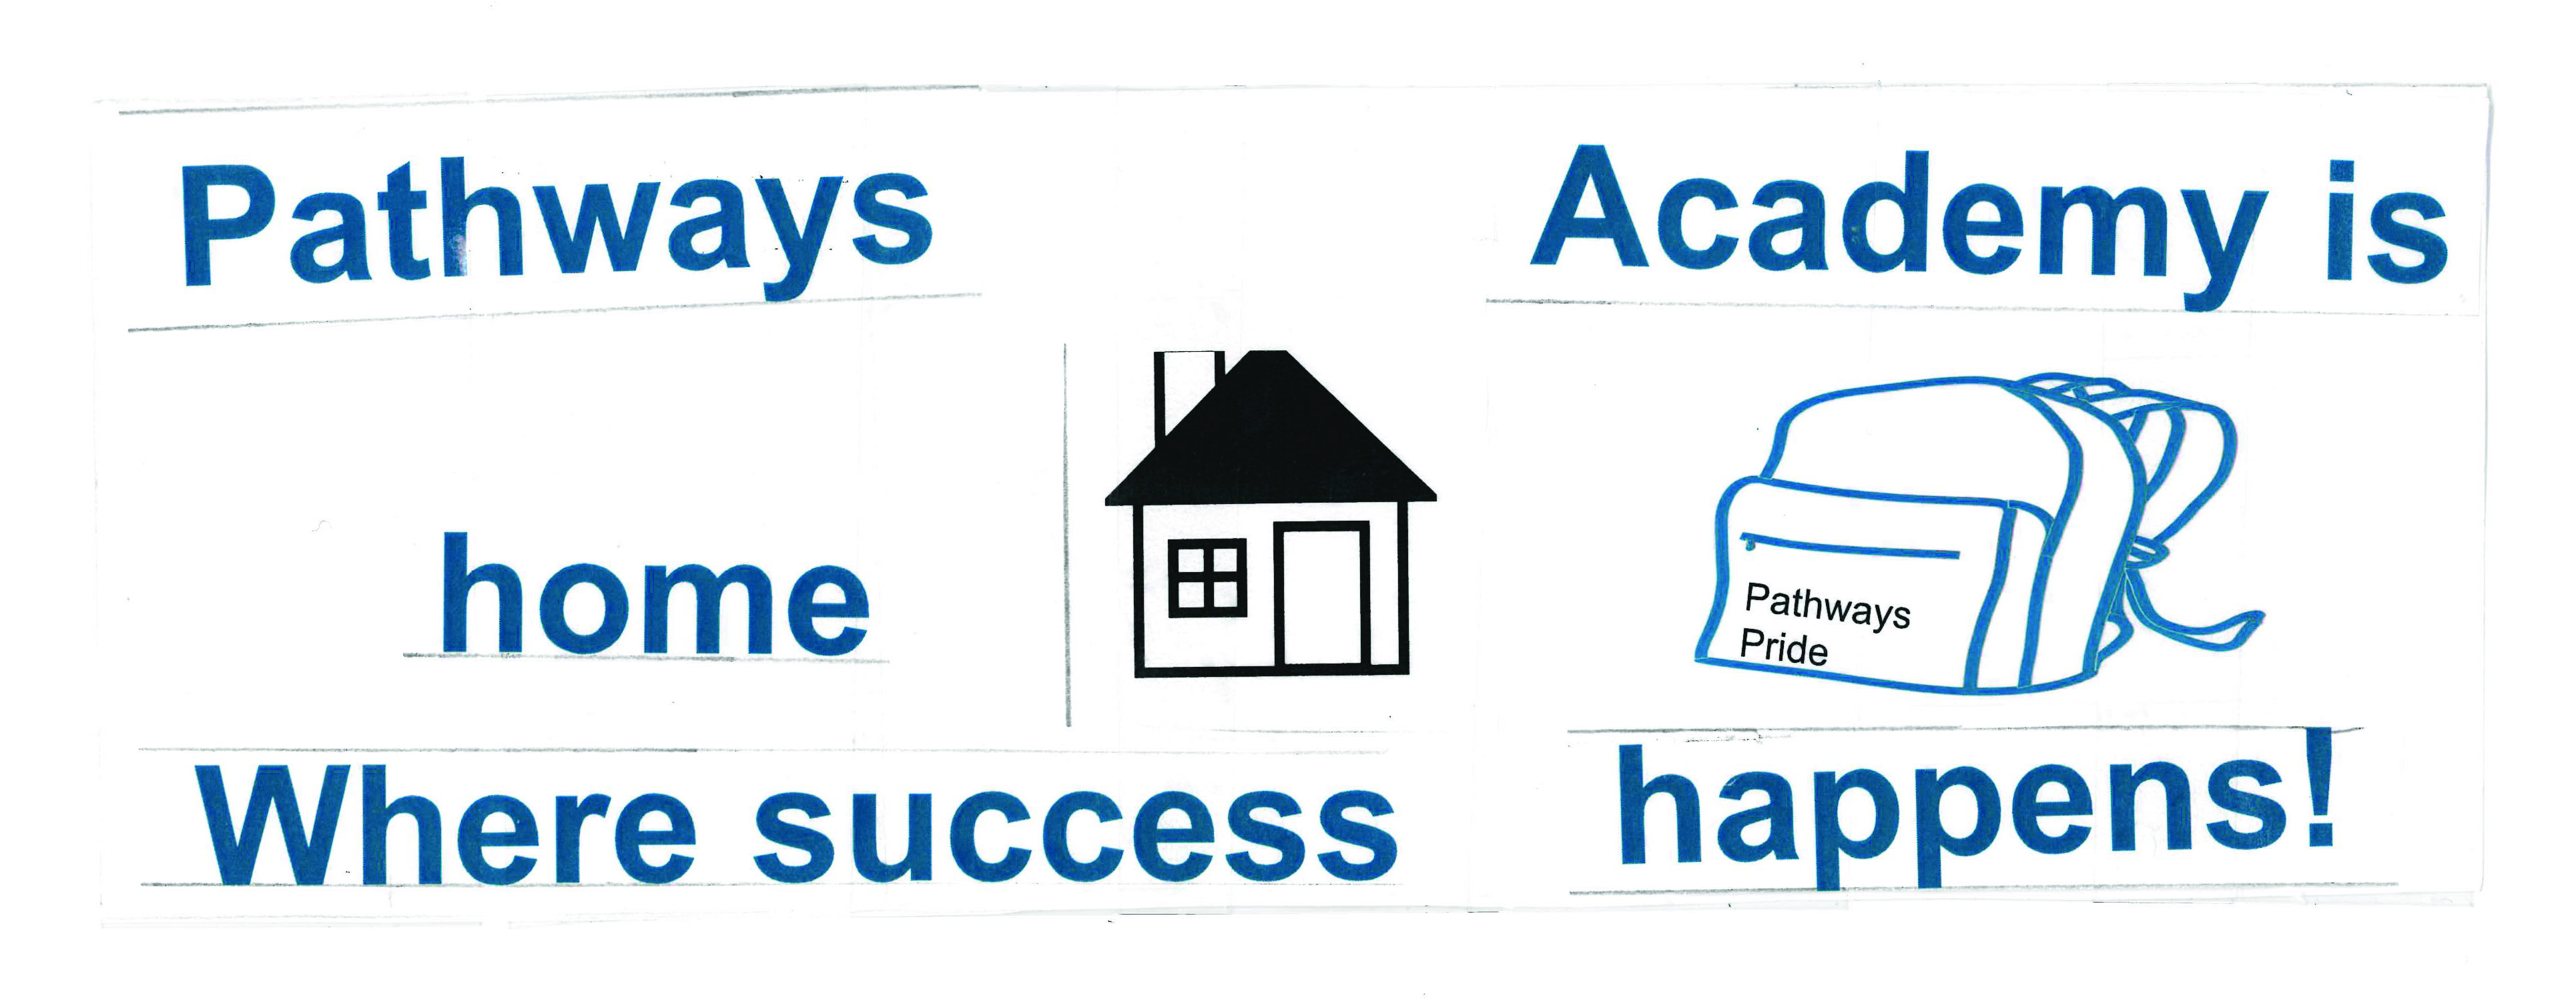 A bumper sticker made by Pathays students showing house and backback illustrations and the words "Pathways Academy is home, where success happens!"